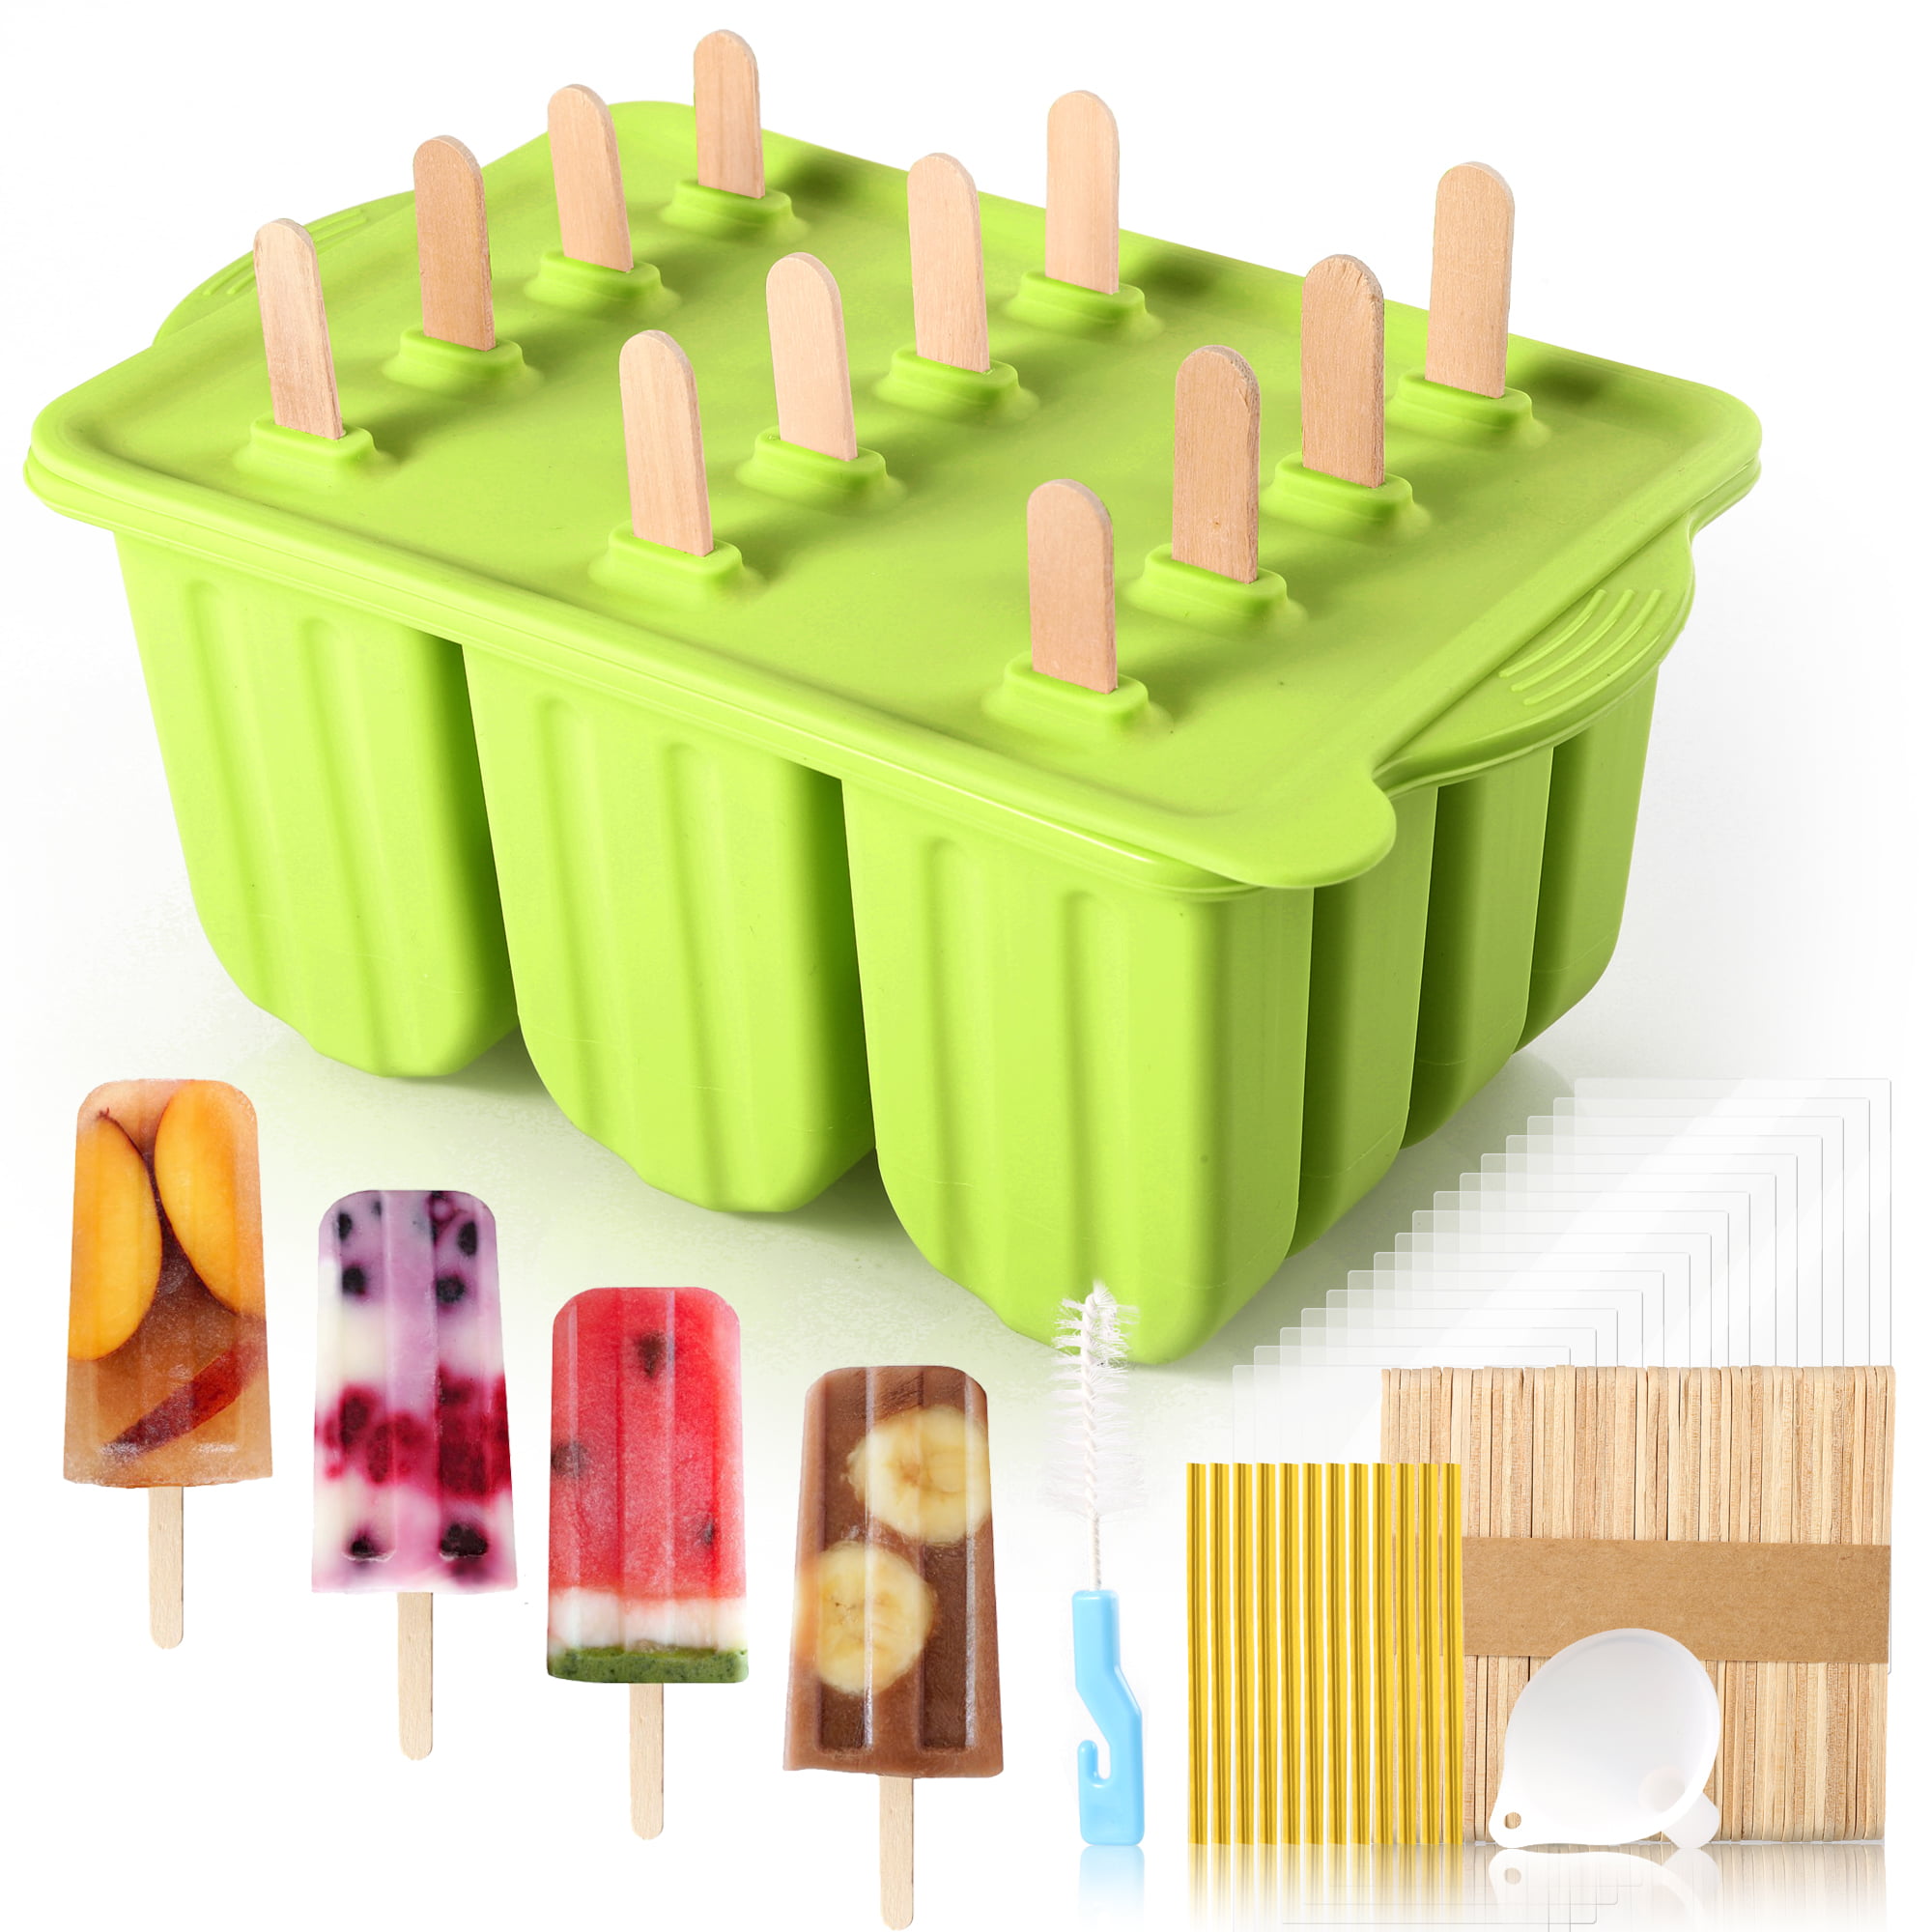 Silicone Popsicle Mold Tray Ice Cream Mold Ice Pop Lolly Maker Frozen Mould Tool 